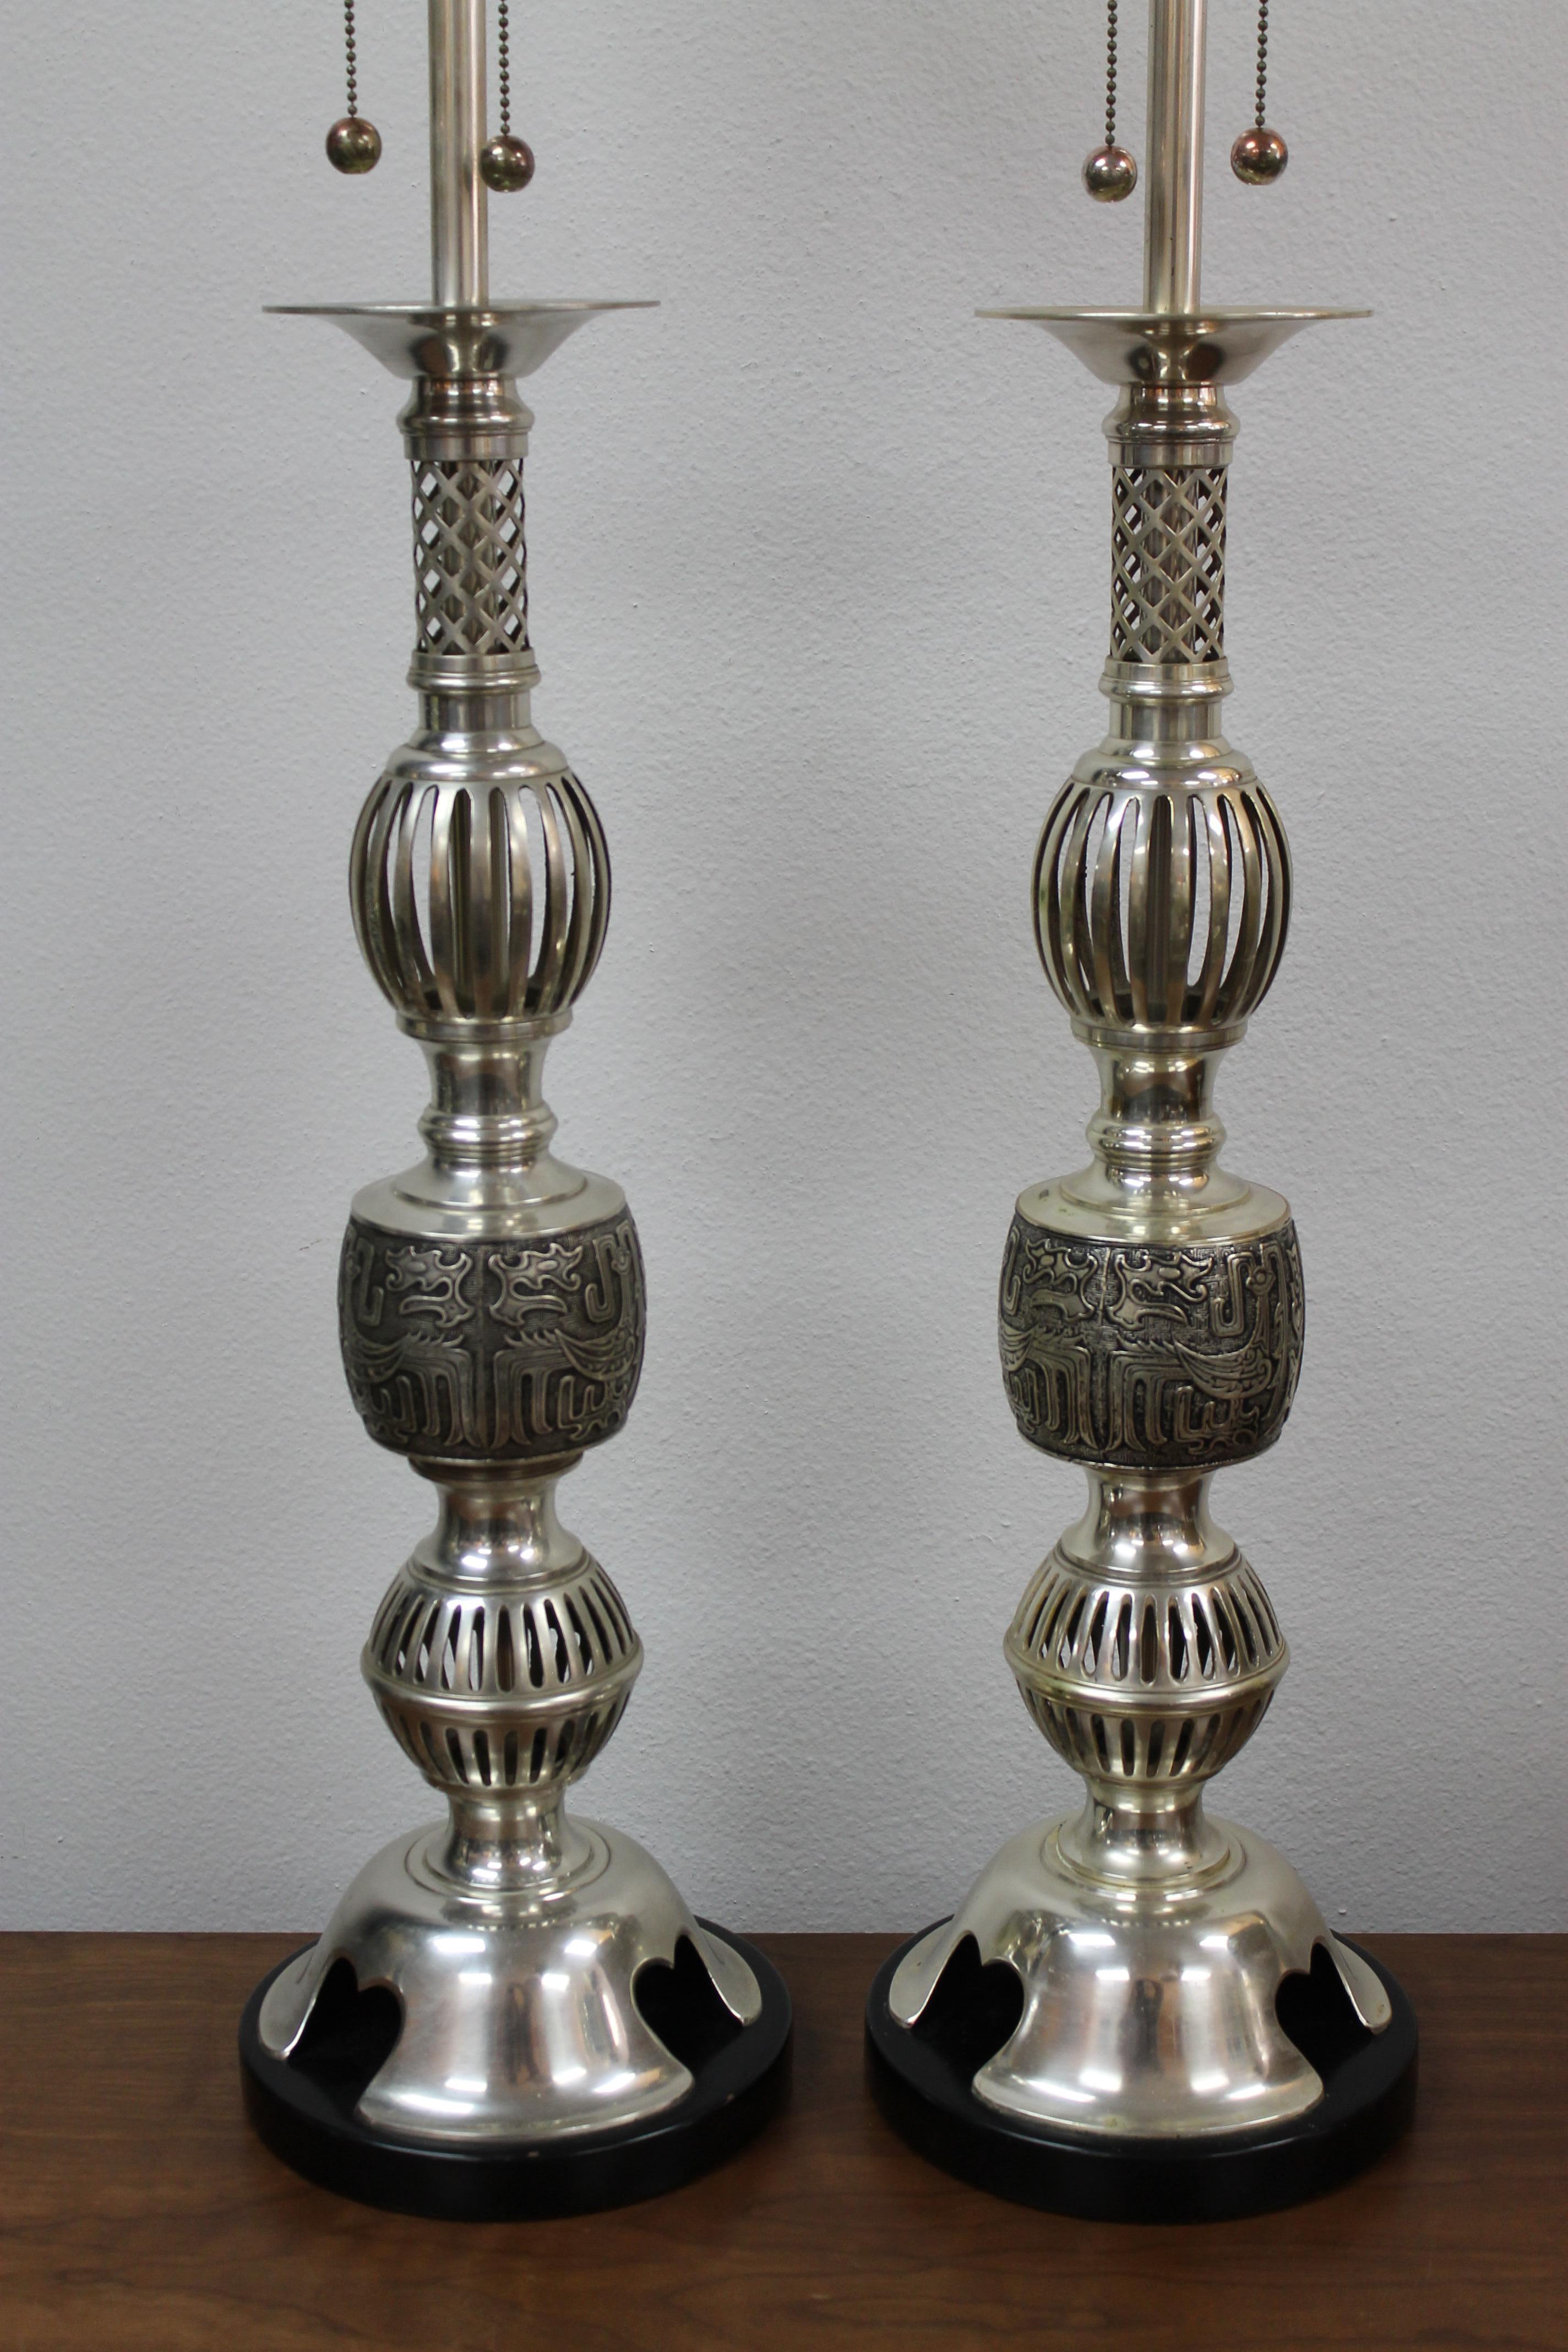 Mid-20th Century Pair of Table Lamps by The Marbro Lamp Company, Los Angeles, CA.